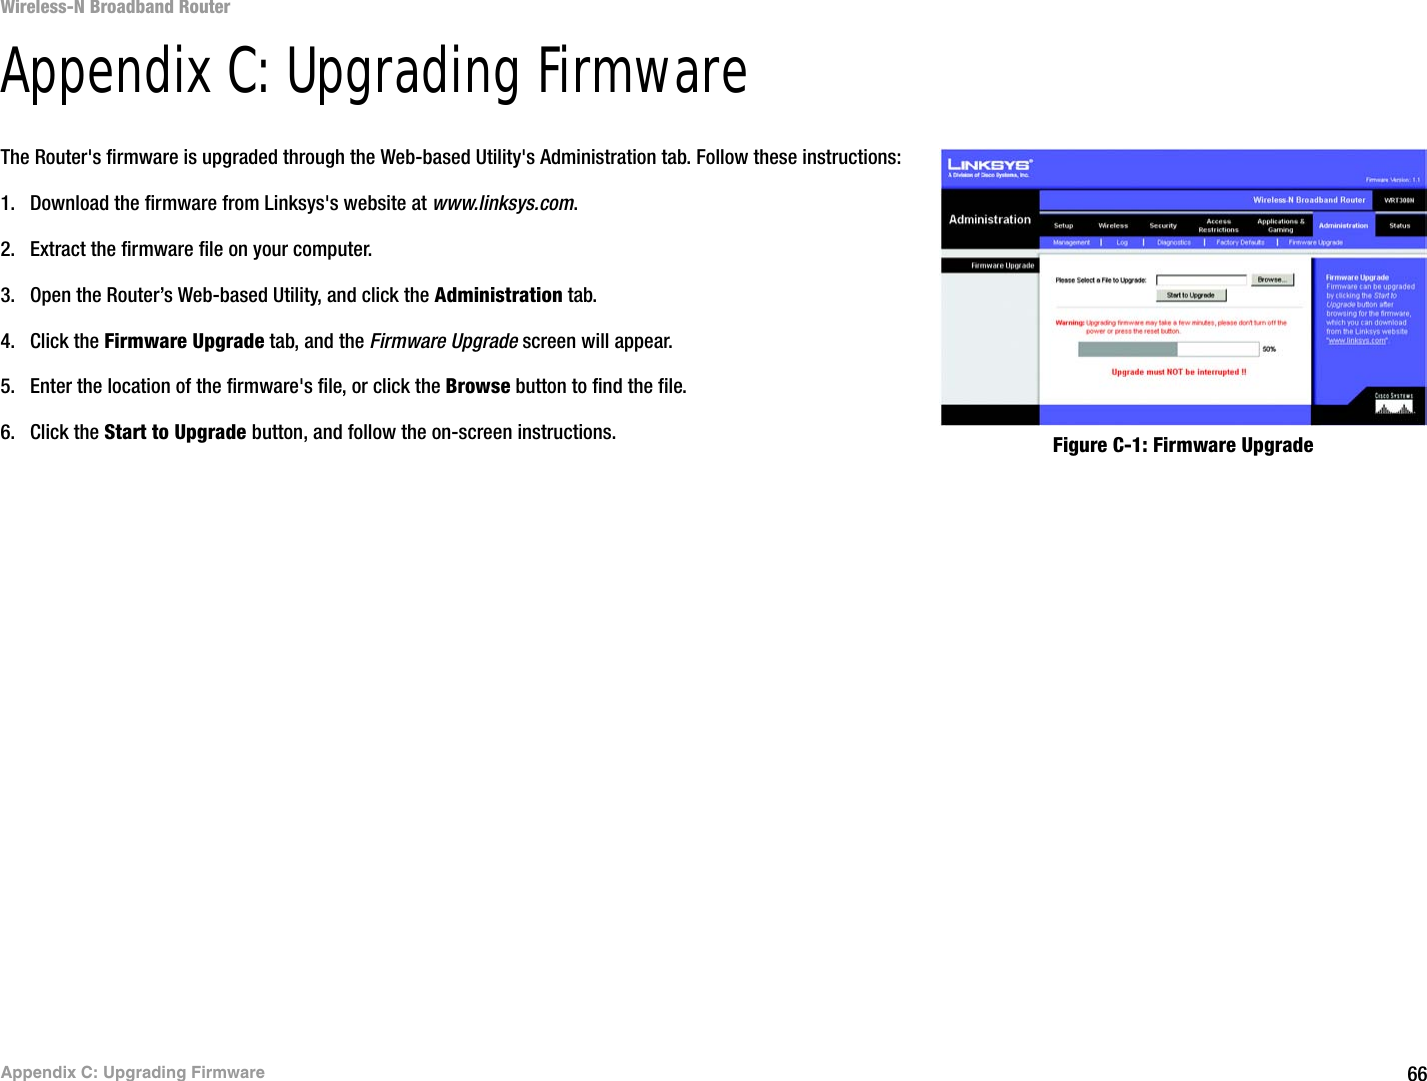 66Appendix C: Upgrading FirmwareWireless-N Broadband RouterAppendix C: Upgrading FirmwareThe Router&apos;s firmware is upgraded through the Web-based Utility&apos;s Administration tab. Follow these instructions:1. Download the firmware from Linksys&apos;s website at www.linksys.com.2. Extract the firmware file on your computer.3. Open the Router’s Web-based Utility, and click the Administration tab.4. Click the Firmware Upgrade tab, and the Firmware Upgrade screen will appear.5. Enter the location of the firmware&apos;s file, or click the Browse button to find the file.6. Click the Start to Upgrade button, and follow the on-screen instructions. Figure C-1: Firmware Upgrade